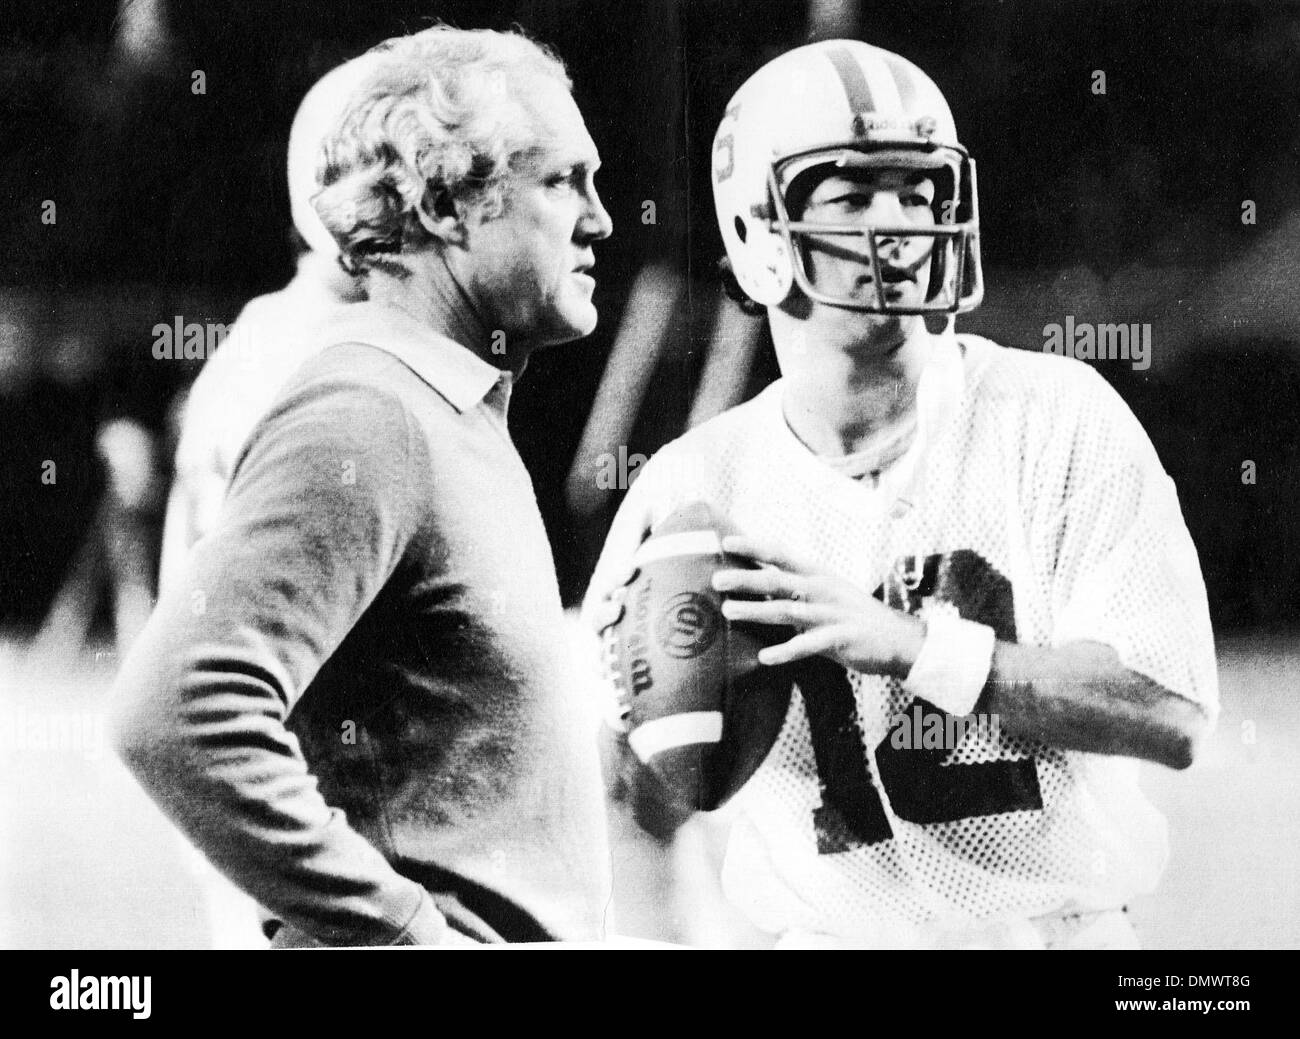 WILLIAM ERNEST WALSH (November 30, 1931 – July 30, 2007), one of the greatest football coaches of all time. Bill Walsh, the inventor of the West Coast Offense, died at the age of 75, following a long battle with leukemia. Walsh didn't become an NFL head coach until 47, building the once-woebegone 49ers into the most successful team of the 1980s with his innovative offensive strateg Stock Photo